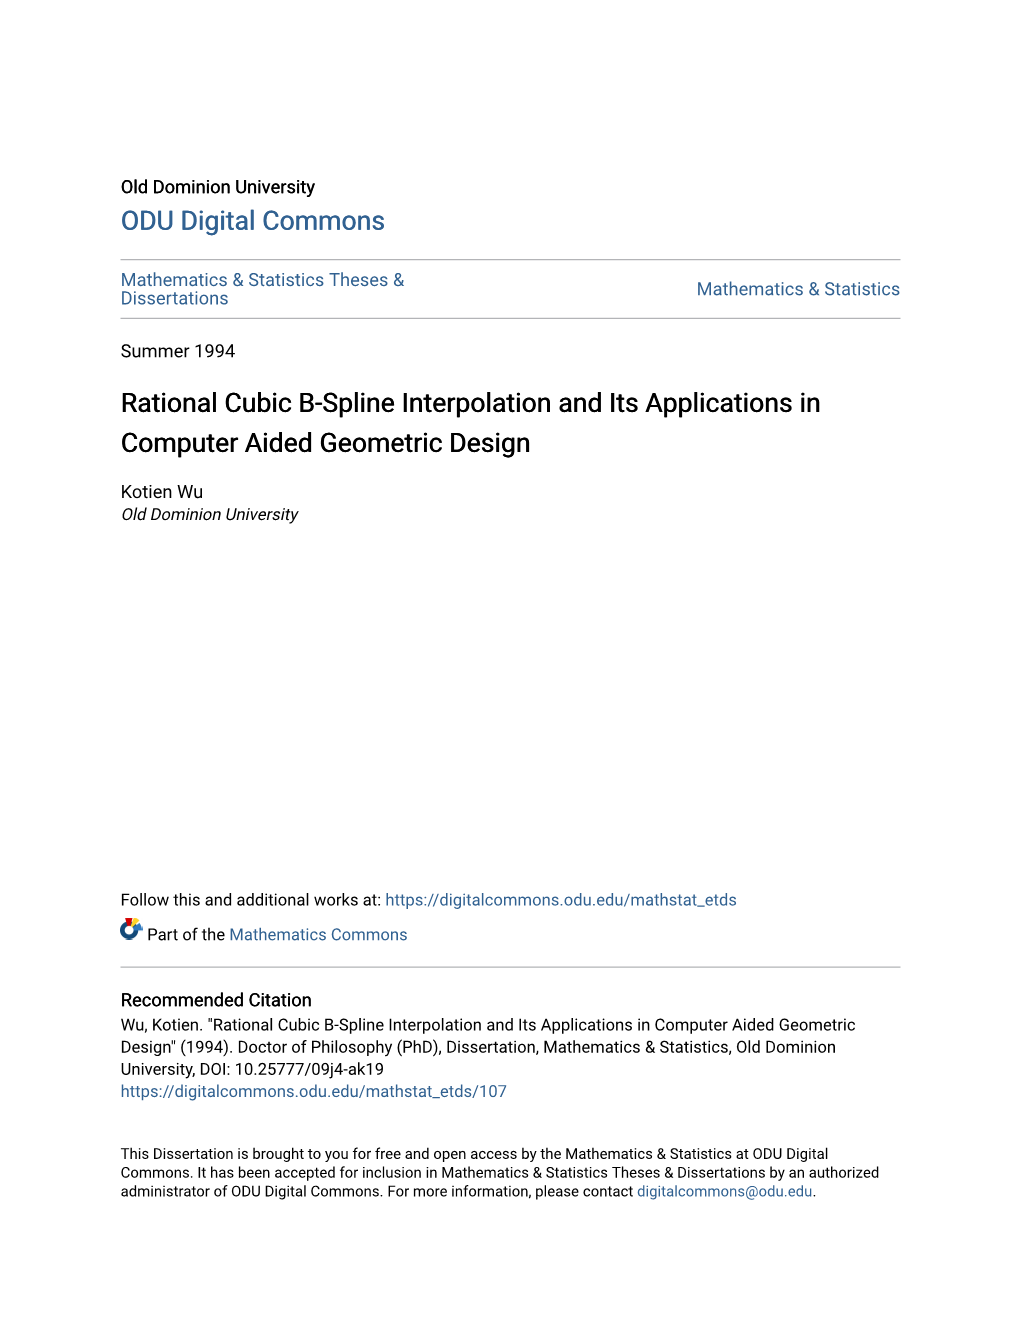 Rational Cubic B-Spline Interpolation and Its Applications in Computer Aided Geometric Design